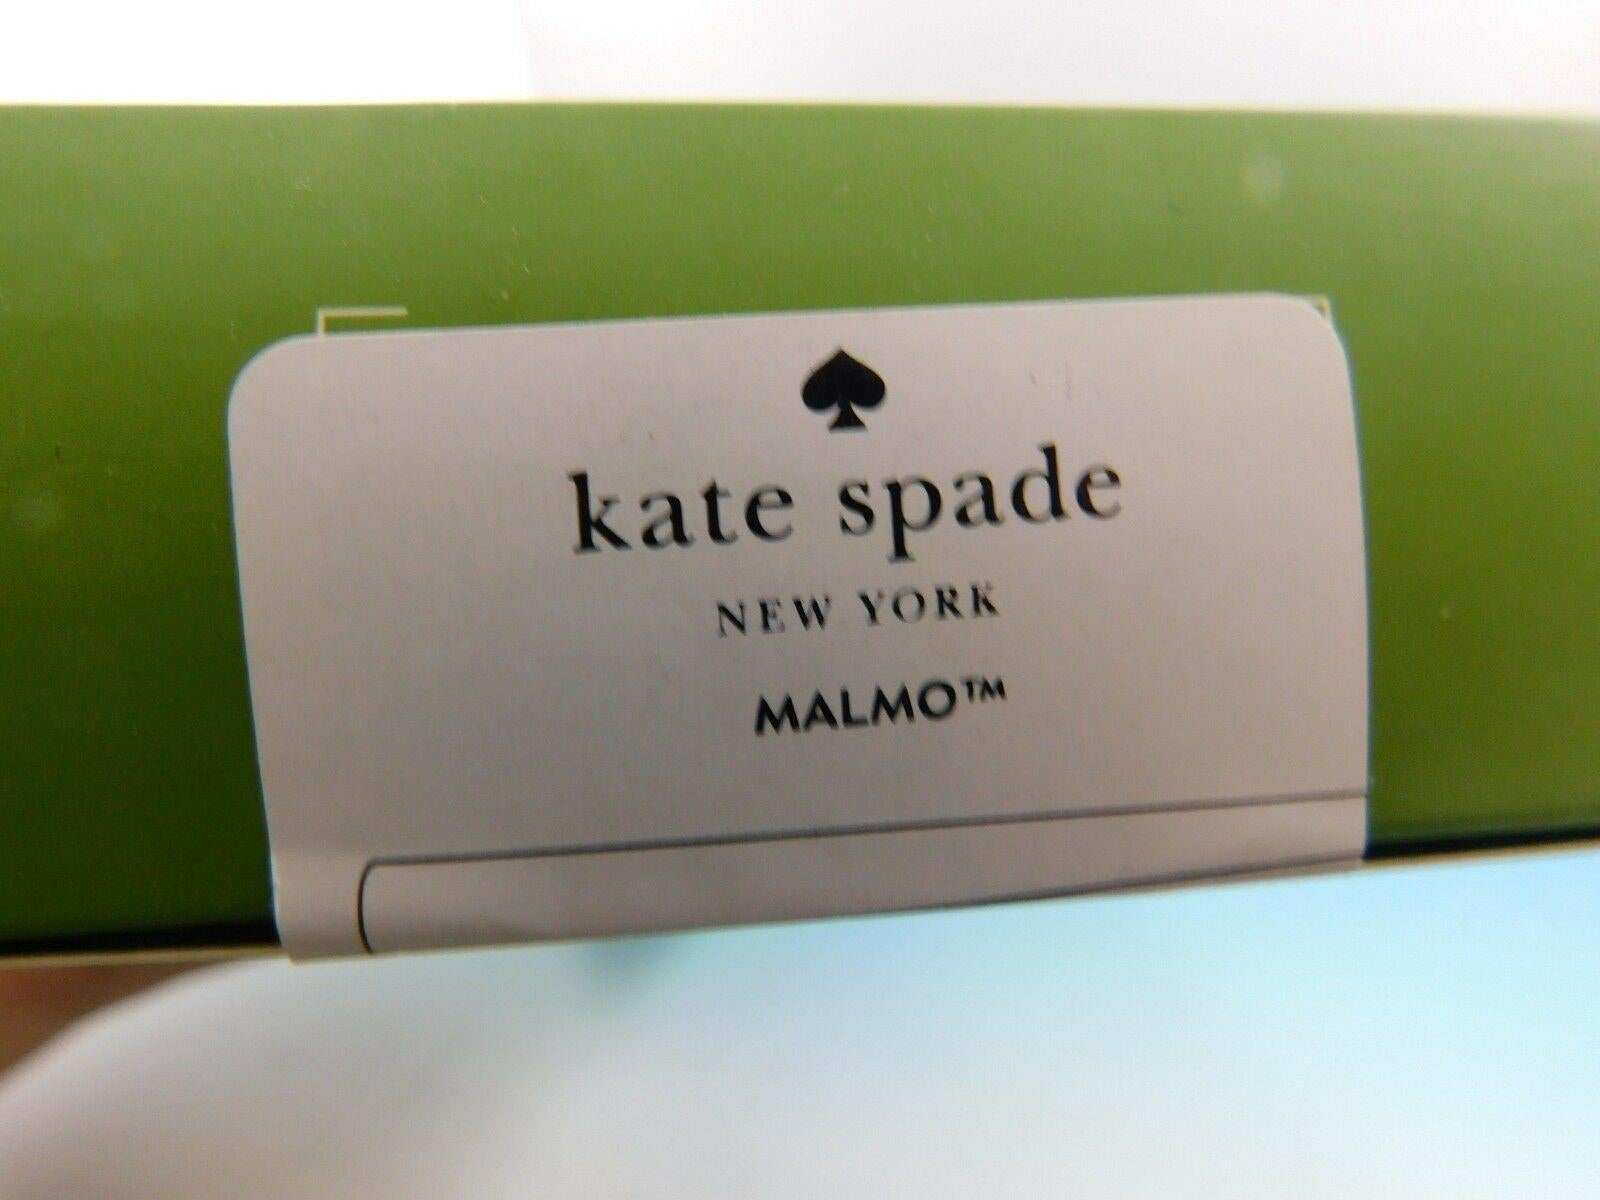 Malmo by Kate Spade NY Stainless Steel Flatware Set Service for 12 New 60 Pieces 2